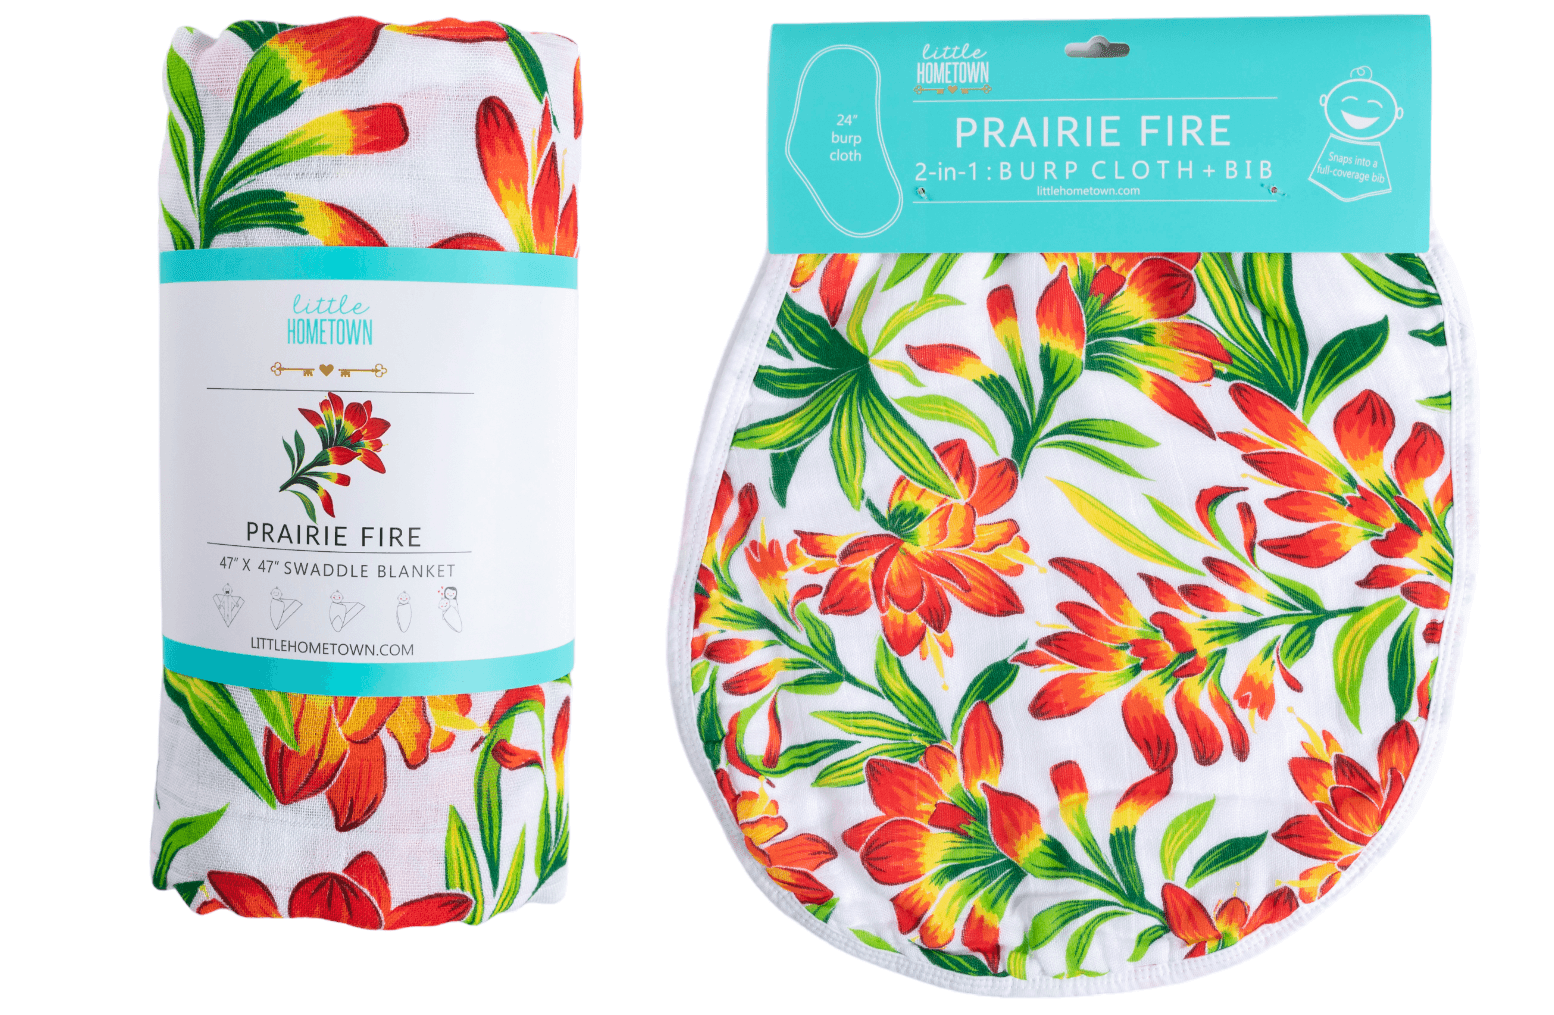 Prairie Fire baby muslin swaddle blanket and burp cloth set with vibrant floral design on a white background.